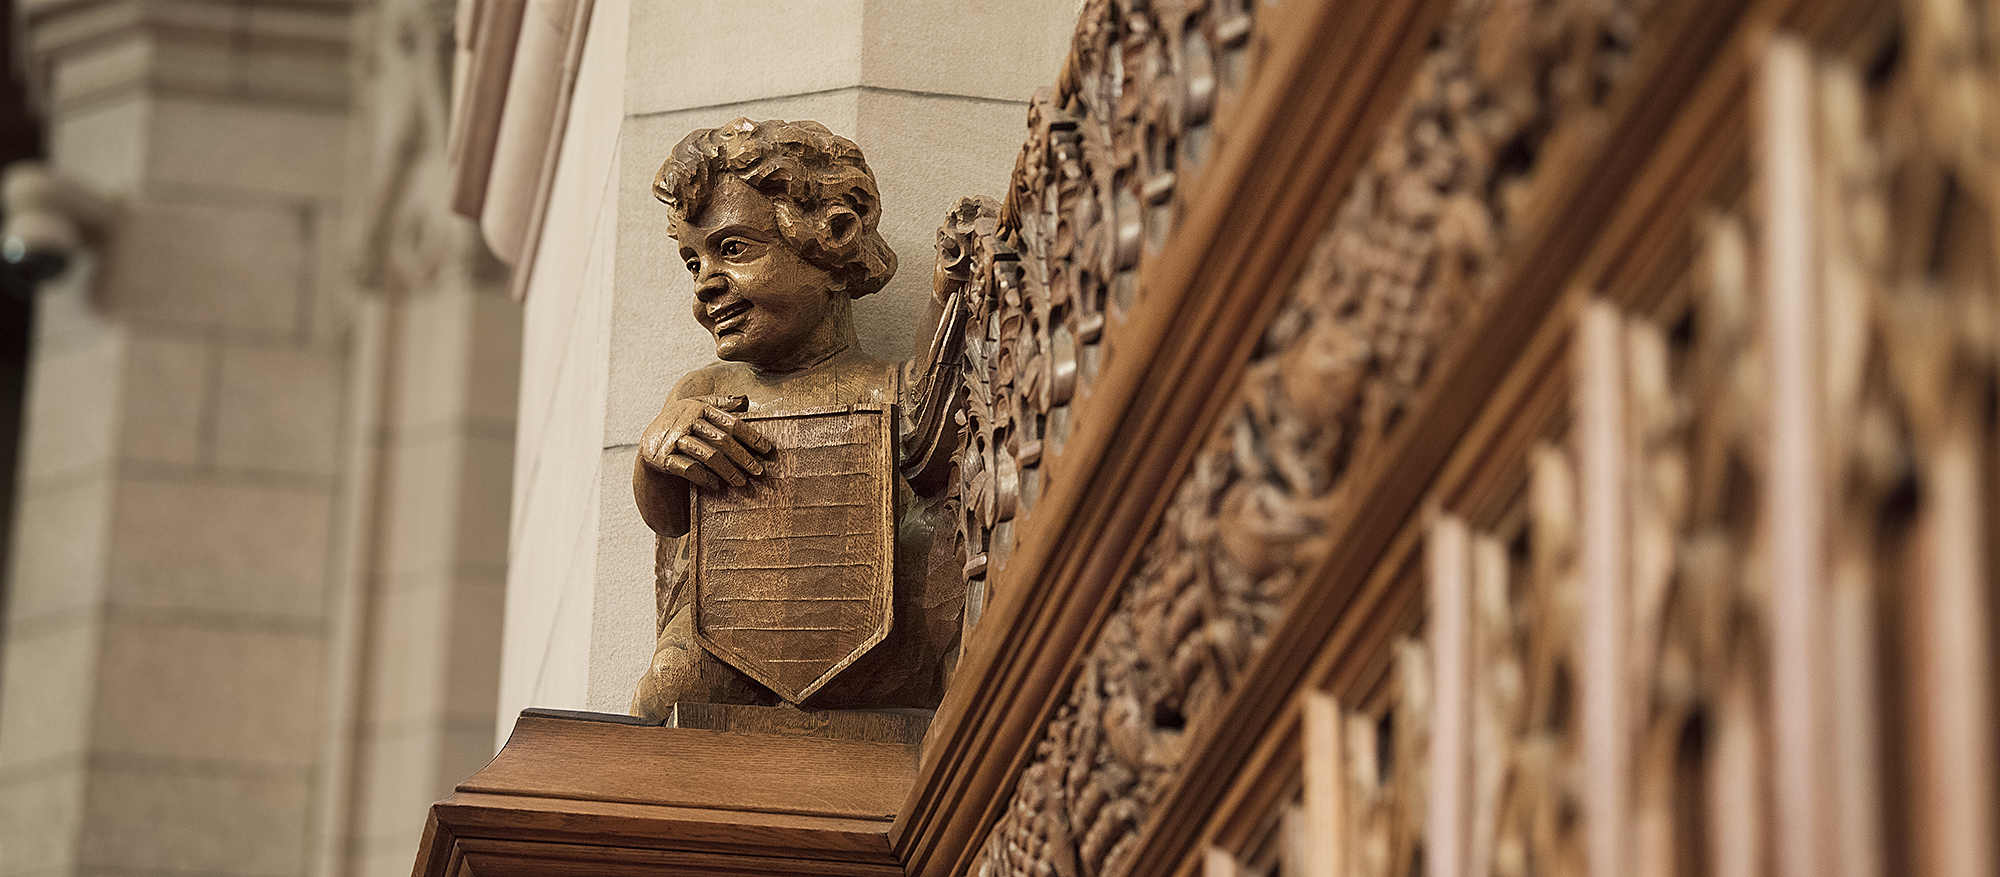 A carving of a smiling angelic child atop decorative wood panelling.